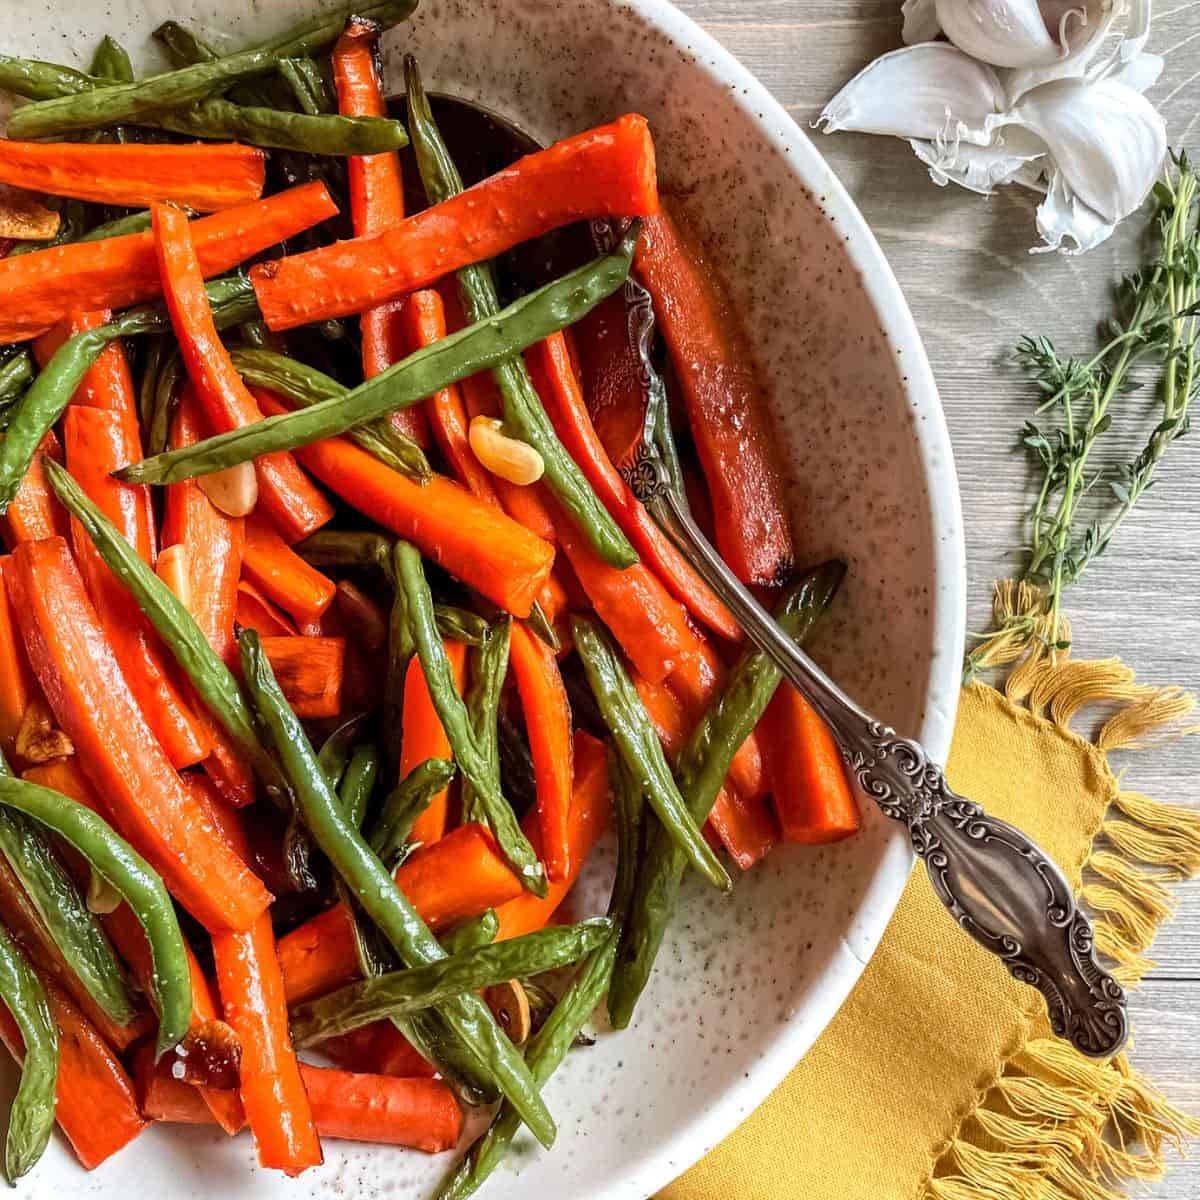 Roasted green beans and carrots in a round bowl, with a spoon, on a yellow cloth napkin, with garlic and fresh thyme in the background.